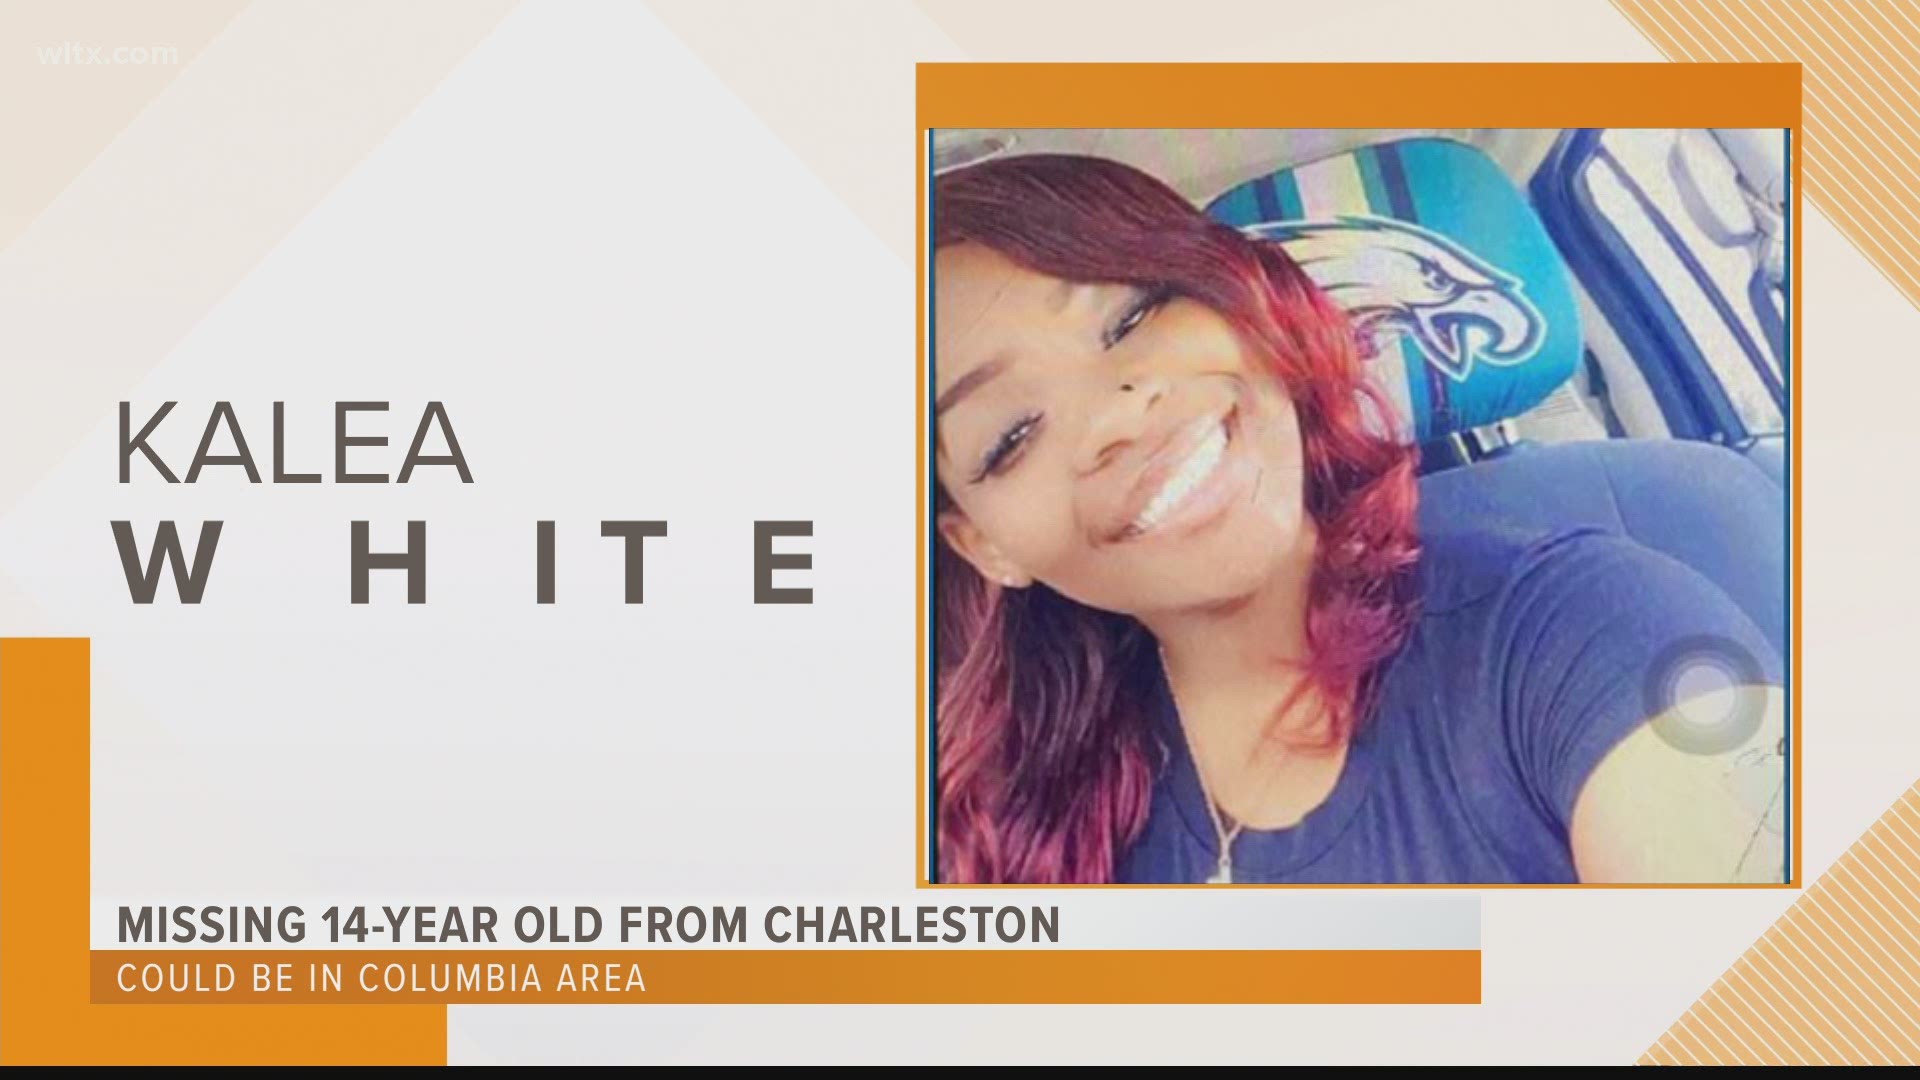 The Charleston County Sheriff's Office is asking the public for assistance in locating a missing teen they think may be in the Columbia, South Carolina area.